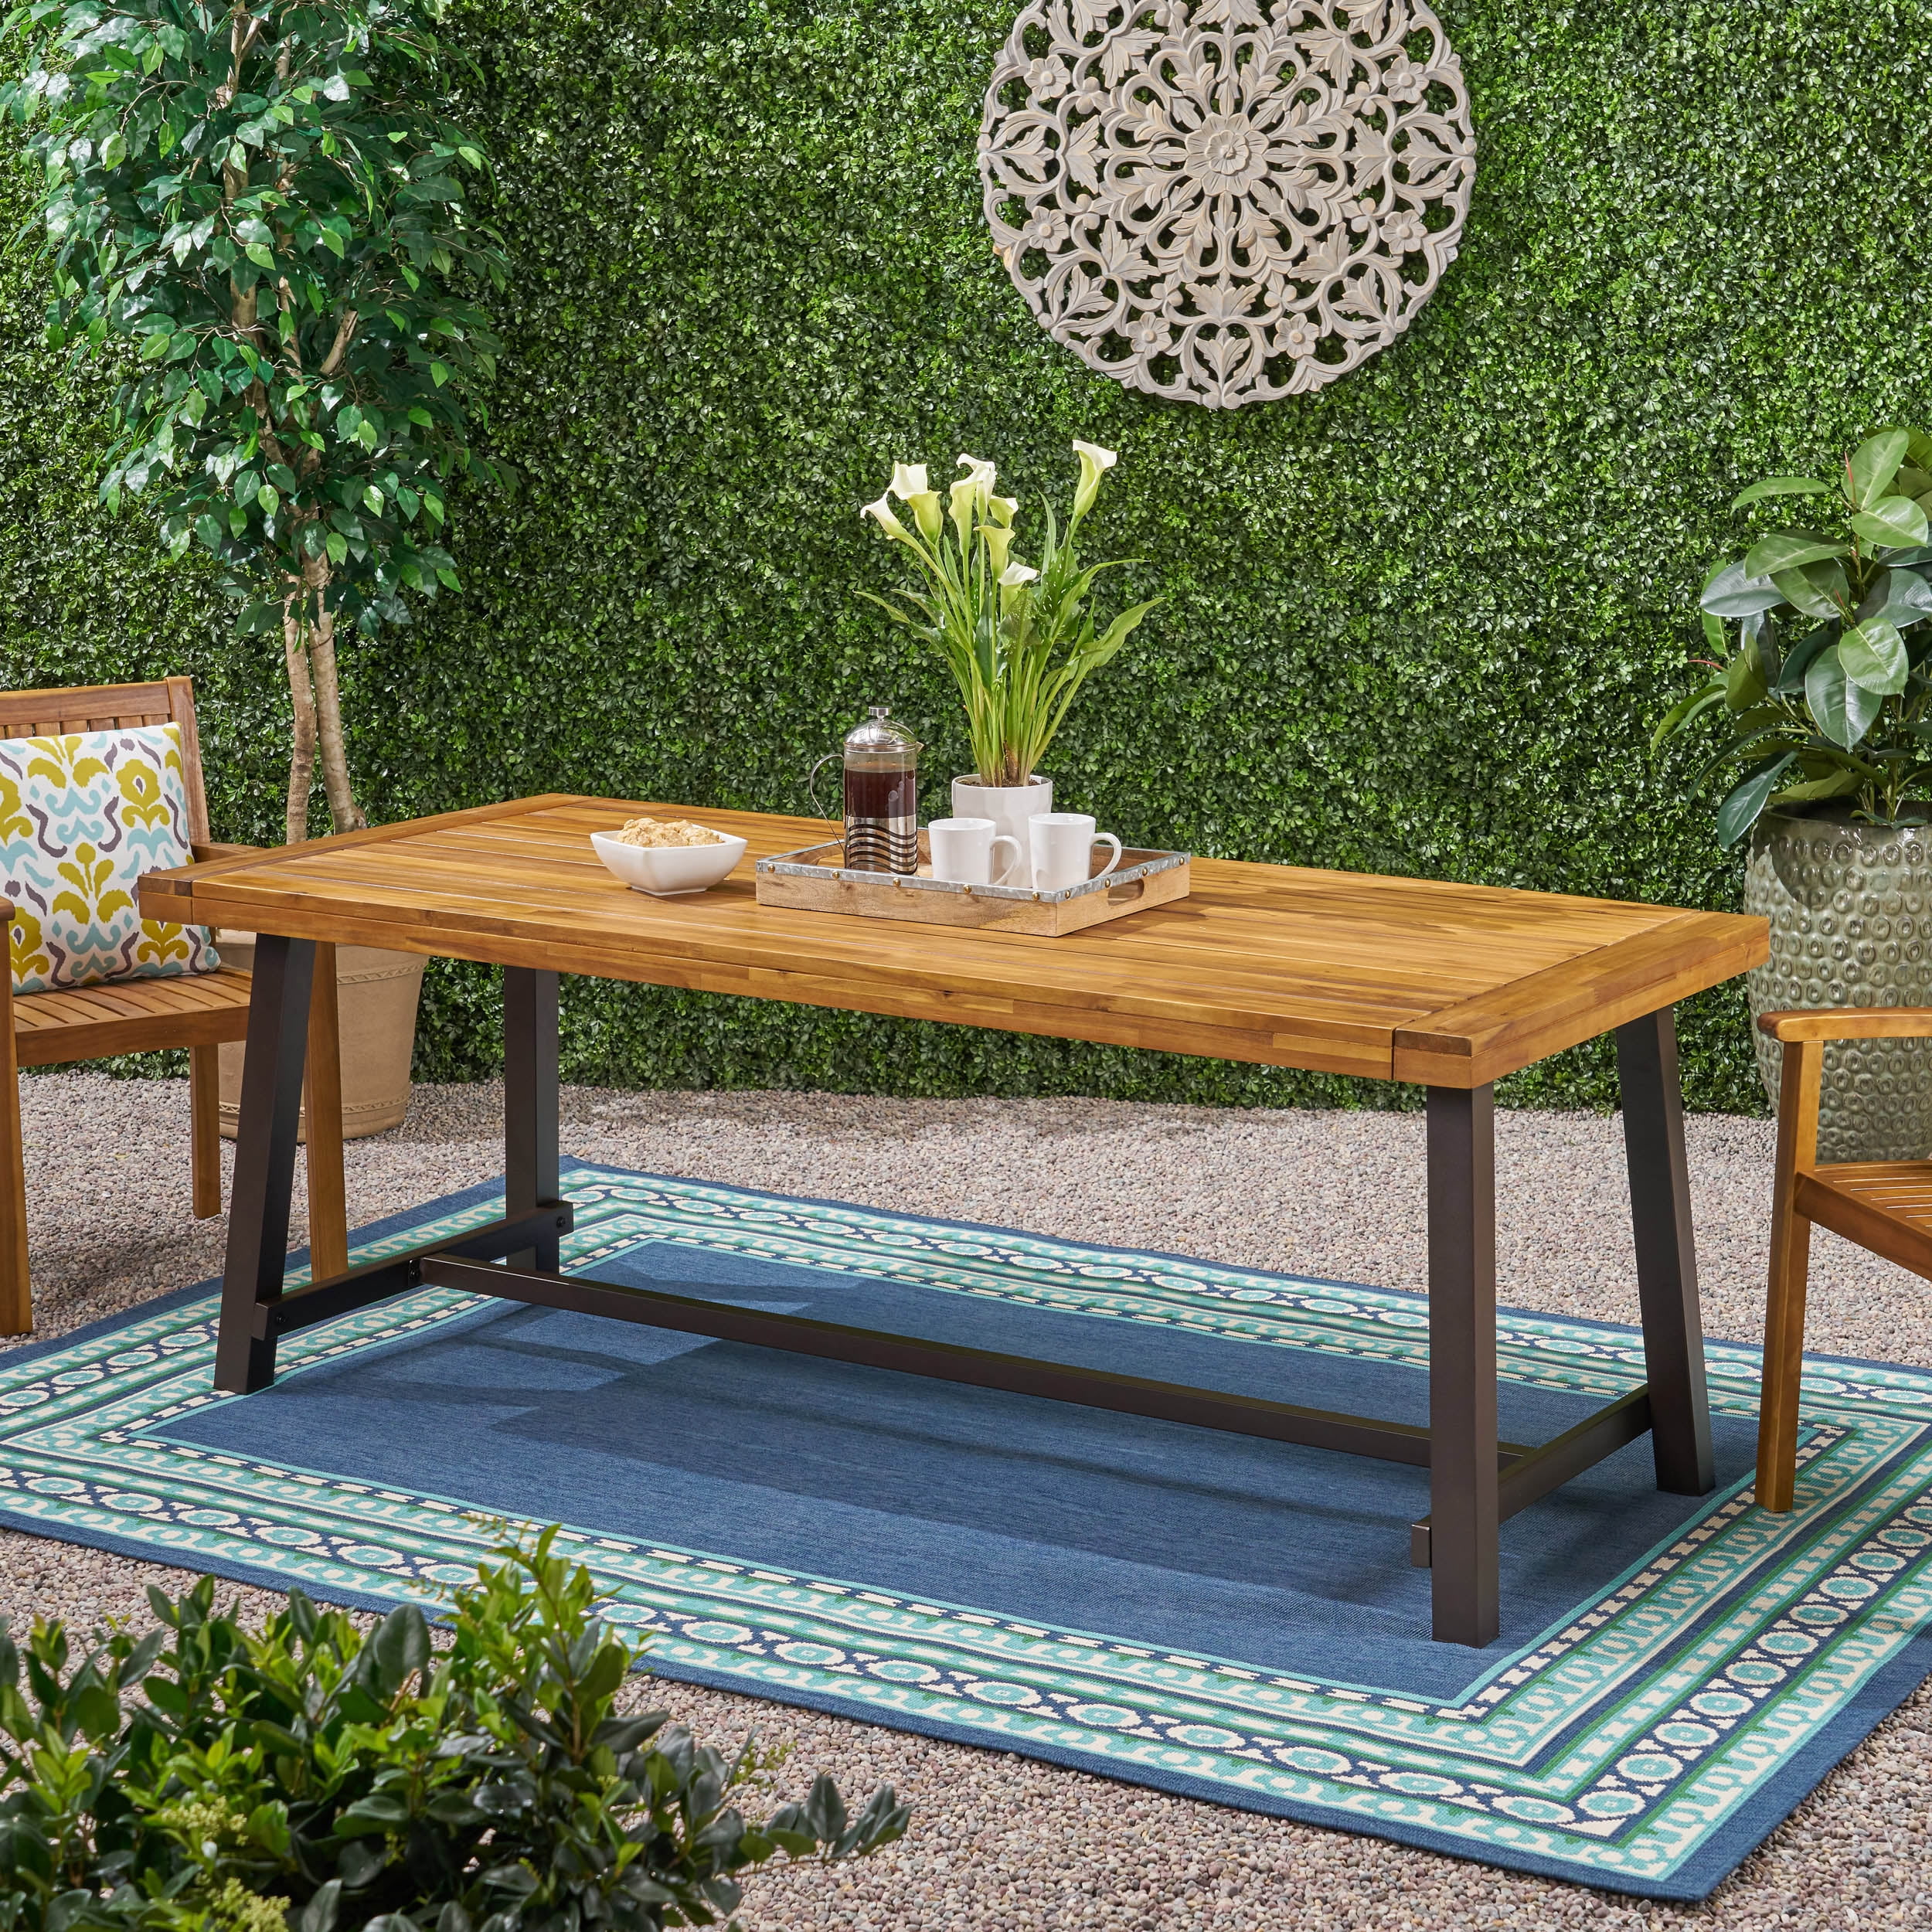 Kamden Outdoor Eight-Seater Wooden Dining Table, Teak and Rustic Metal